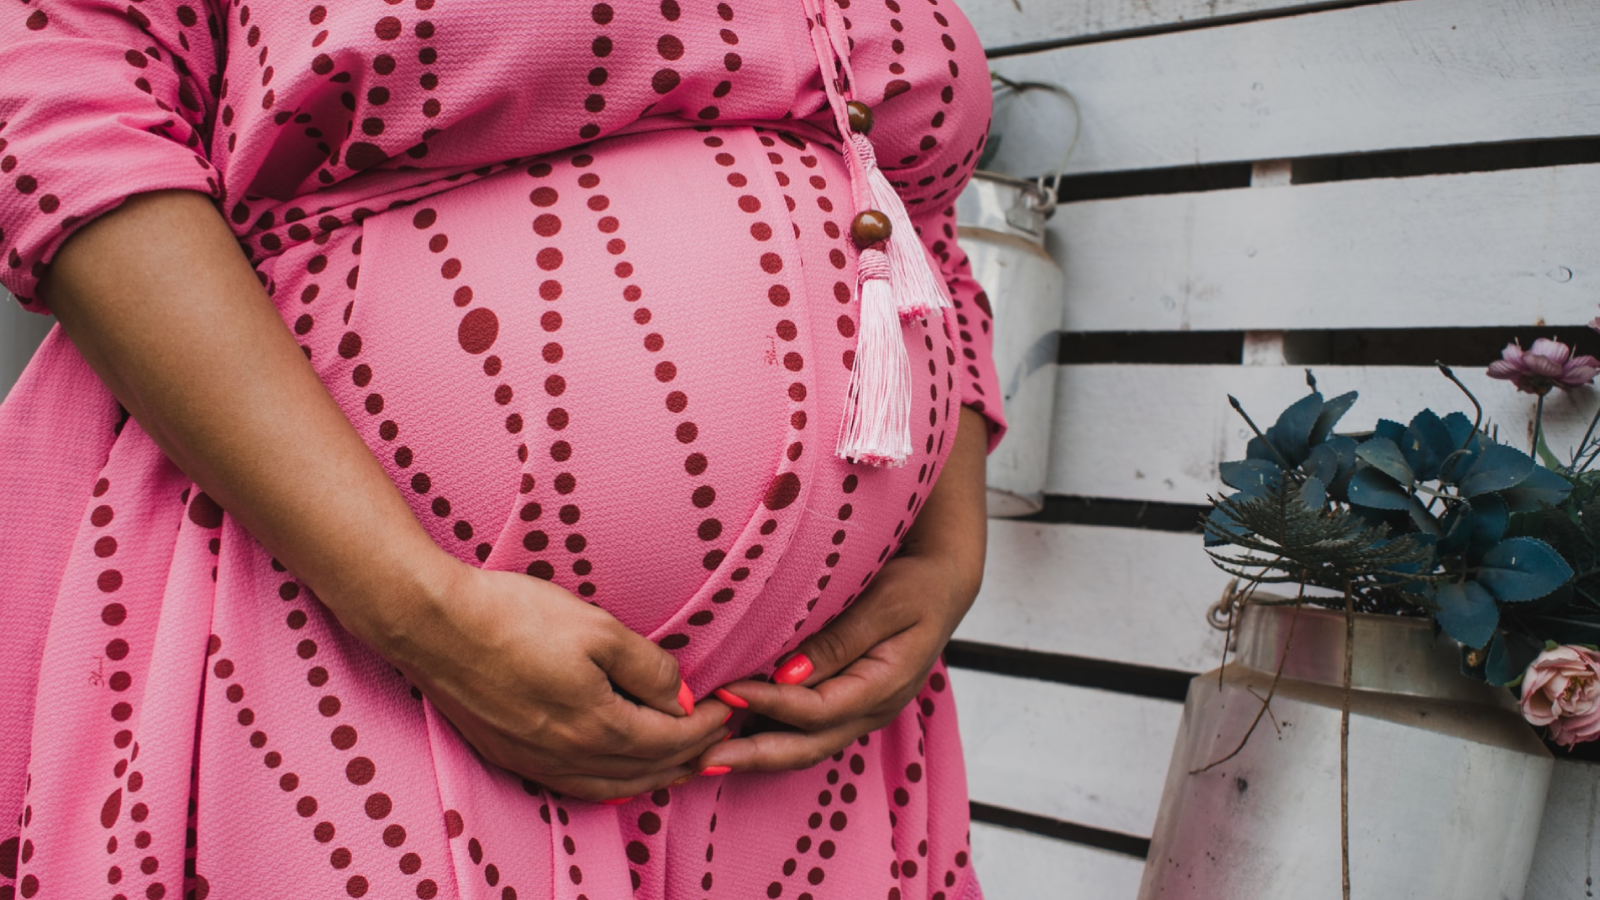 Pregnant woman holding her stomach wearing a pink dress